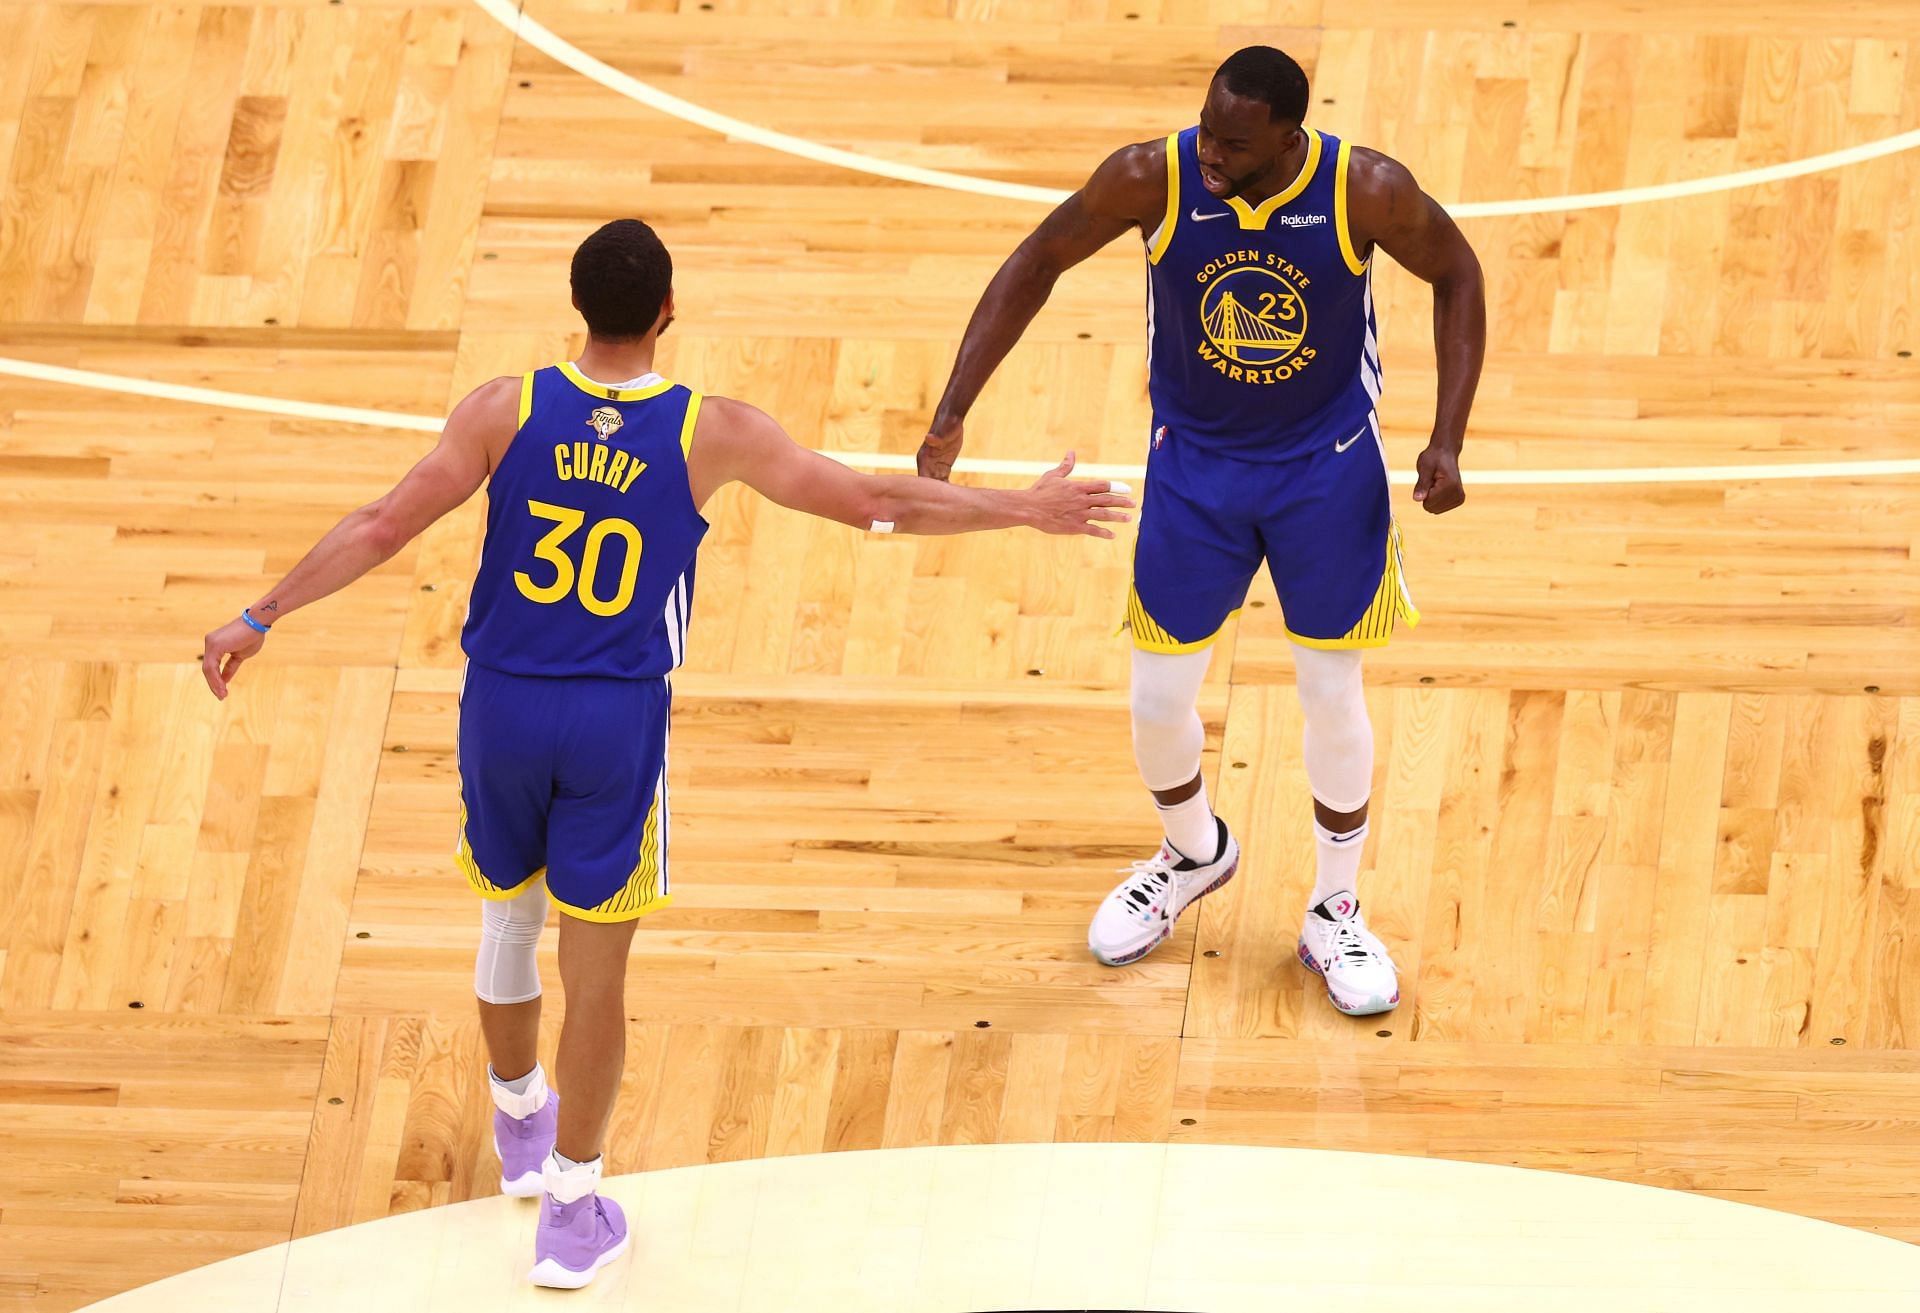 Steph Curry and Draymond Green in action